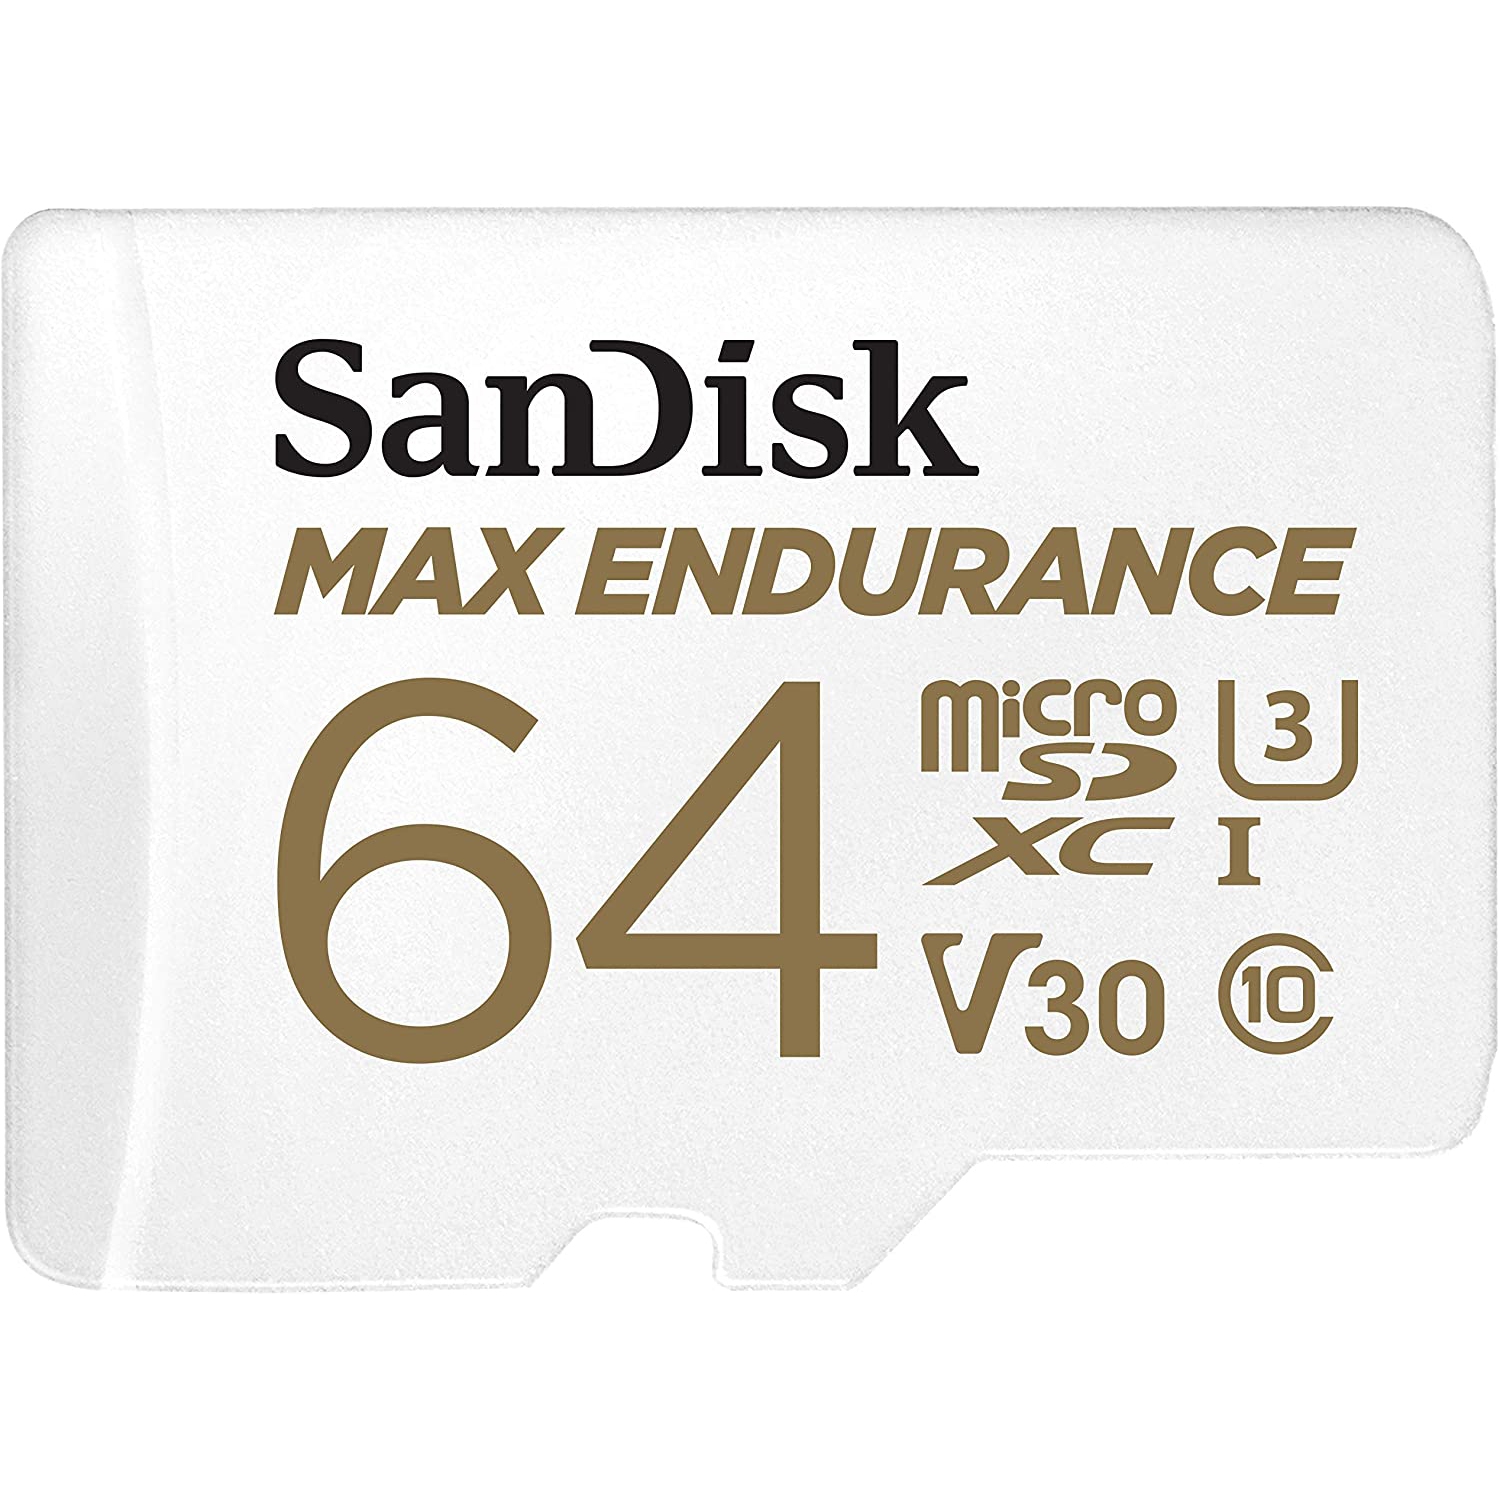 SanDisk MAX Endurance 64GB Micro SD Card with Adapter SDSQQVR-064G for Dash Cam and Video Monitoring System